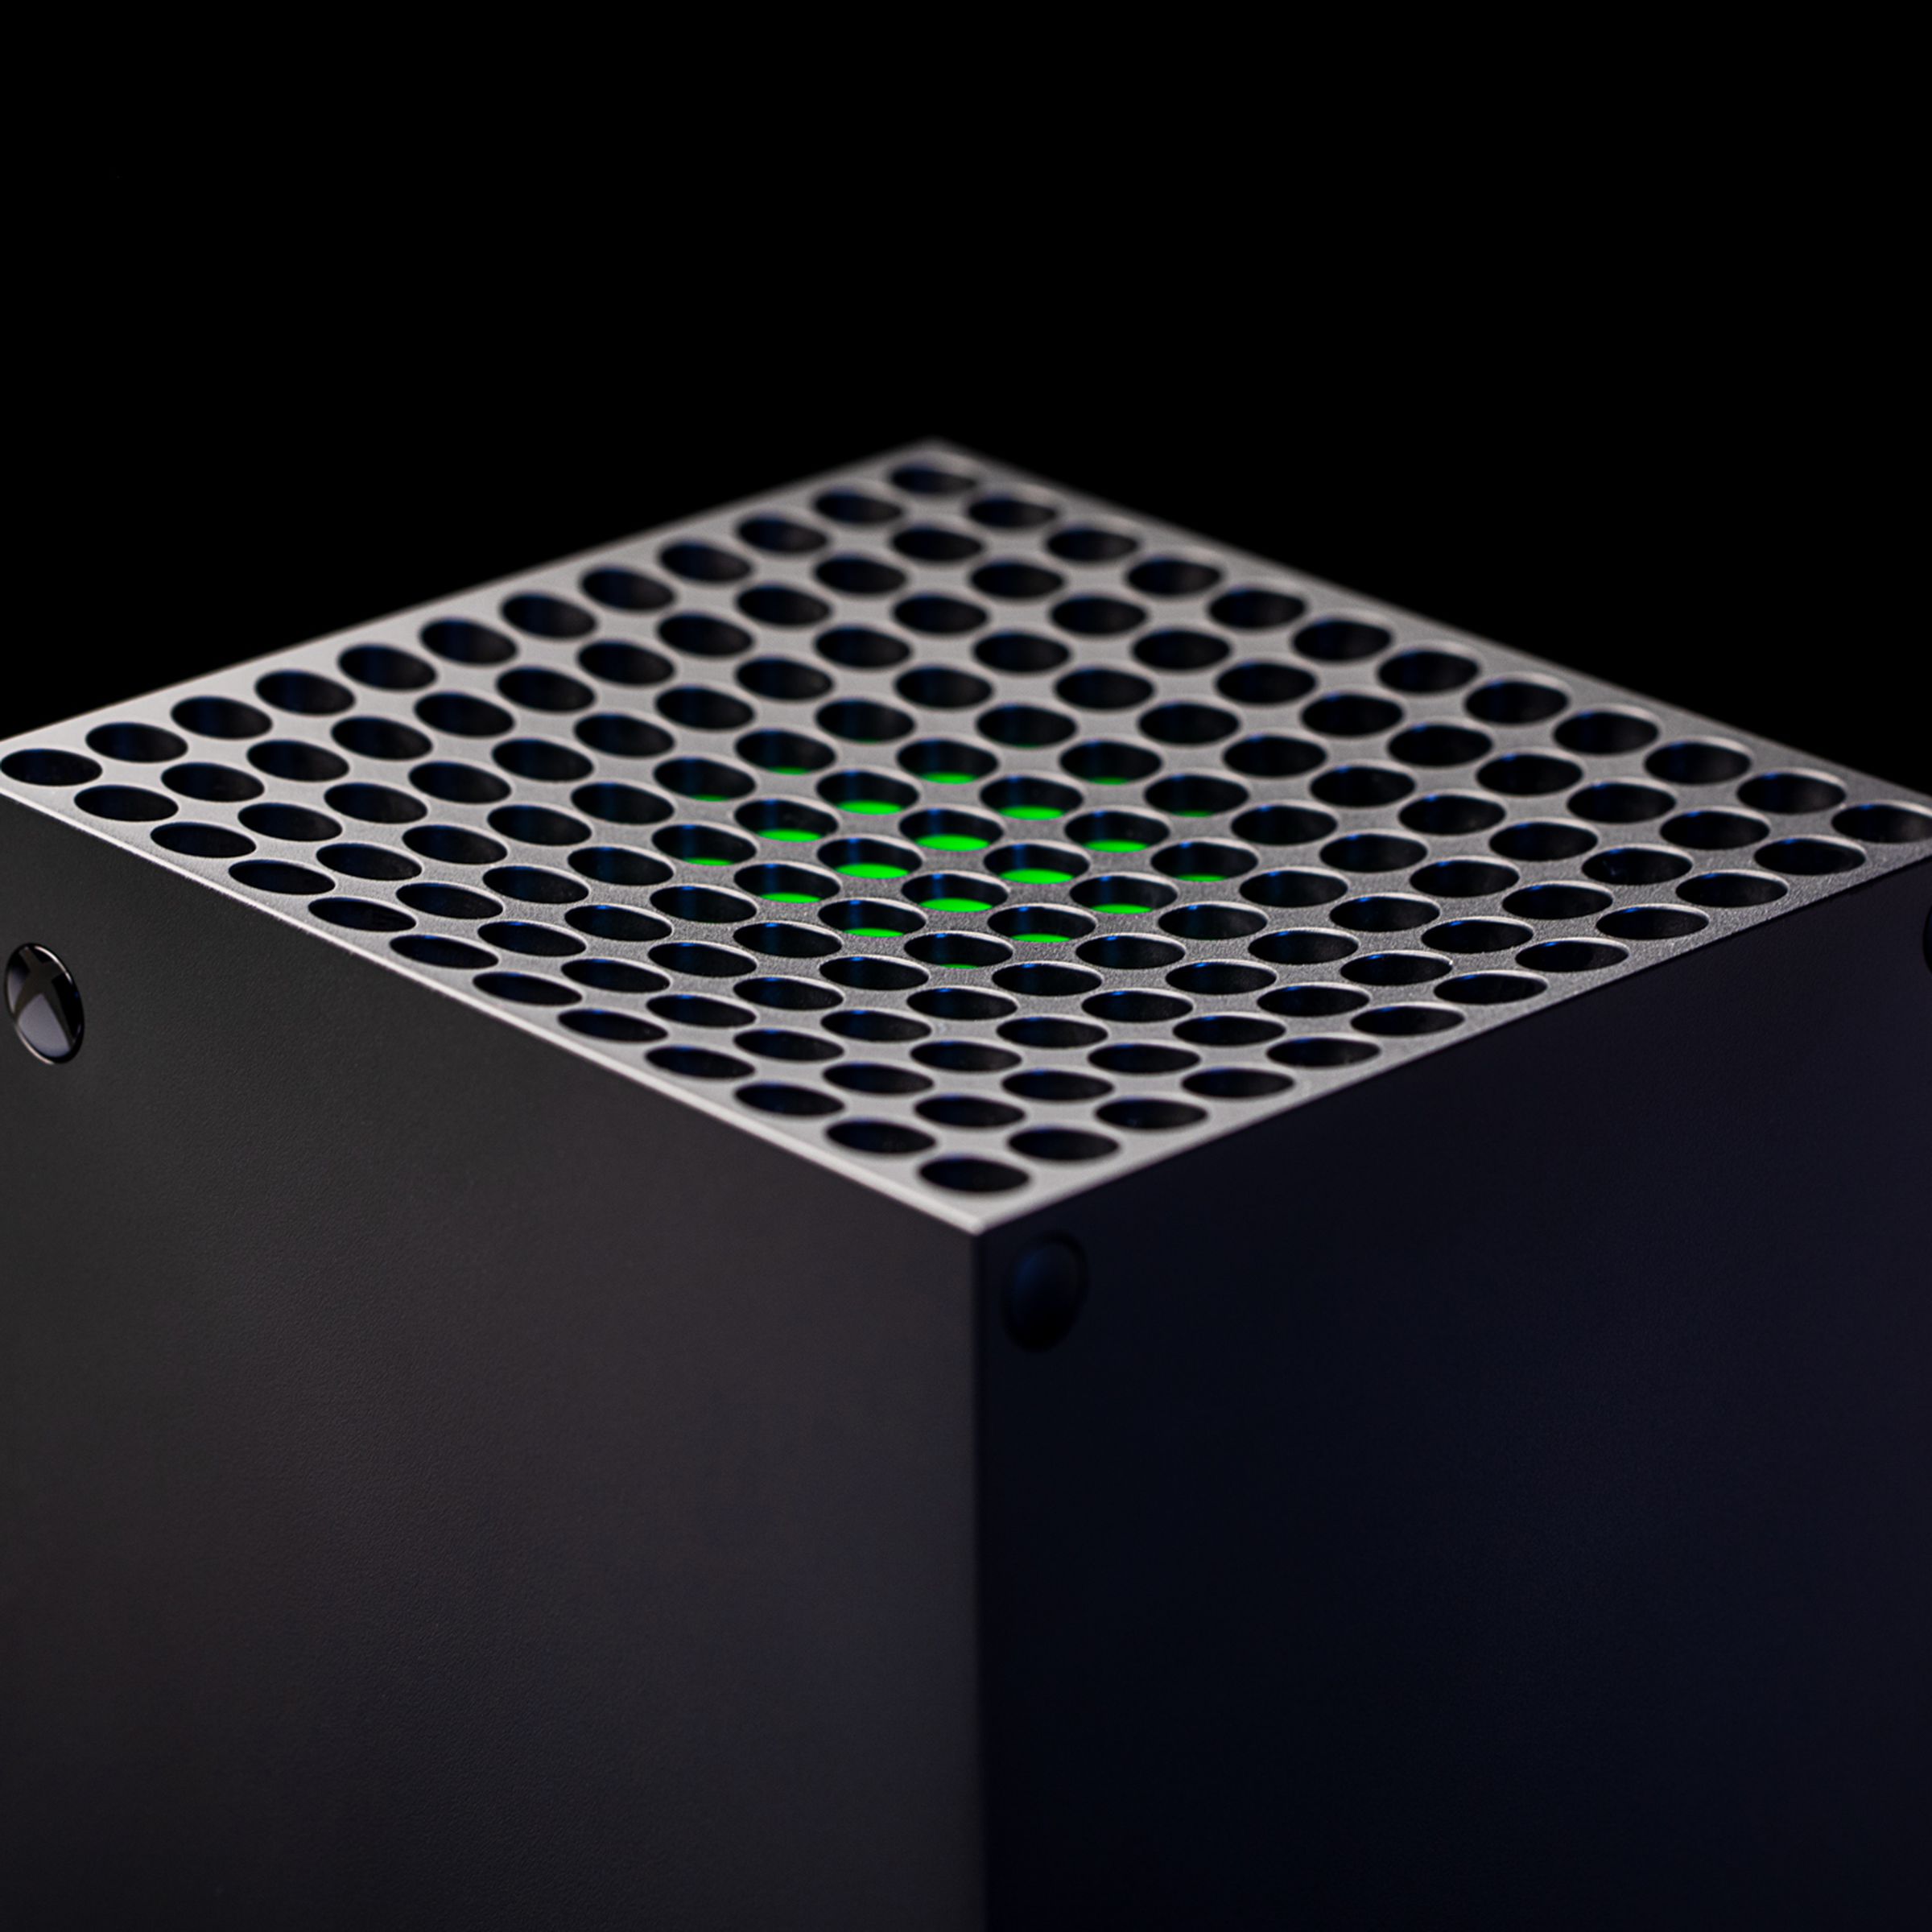 The upper part of the Xbox Series X placed against a black background.